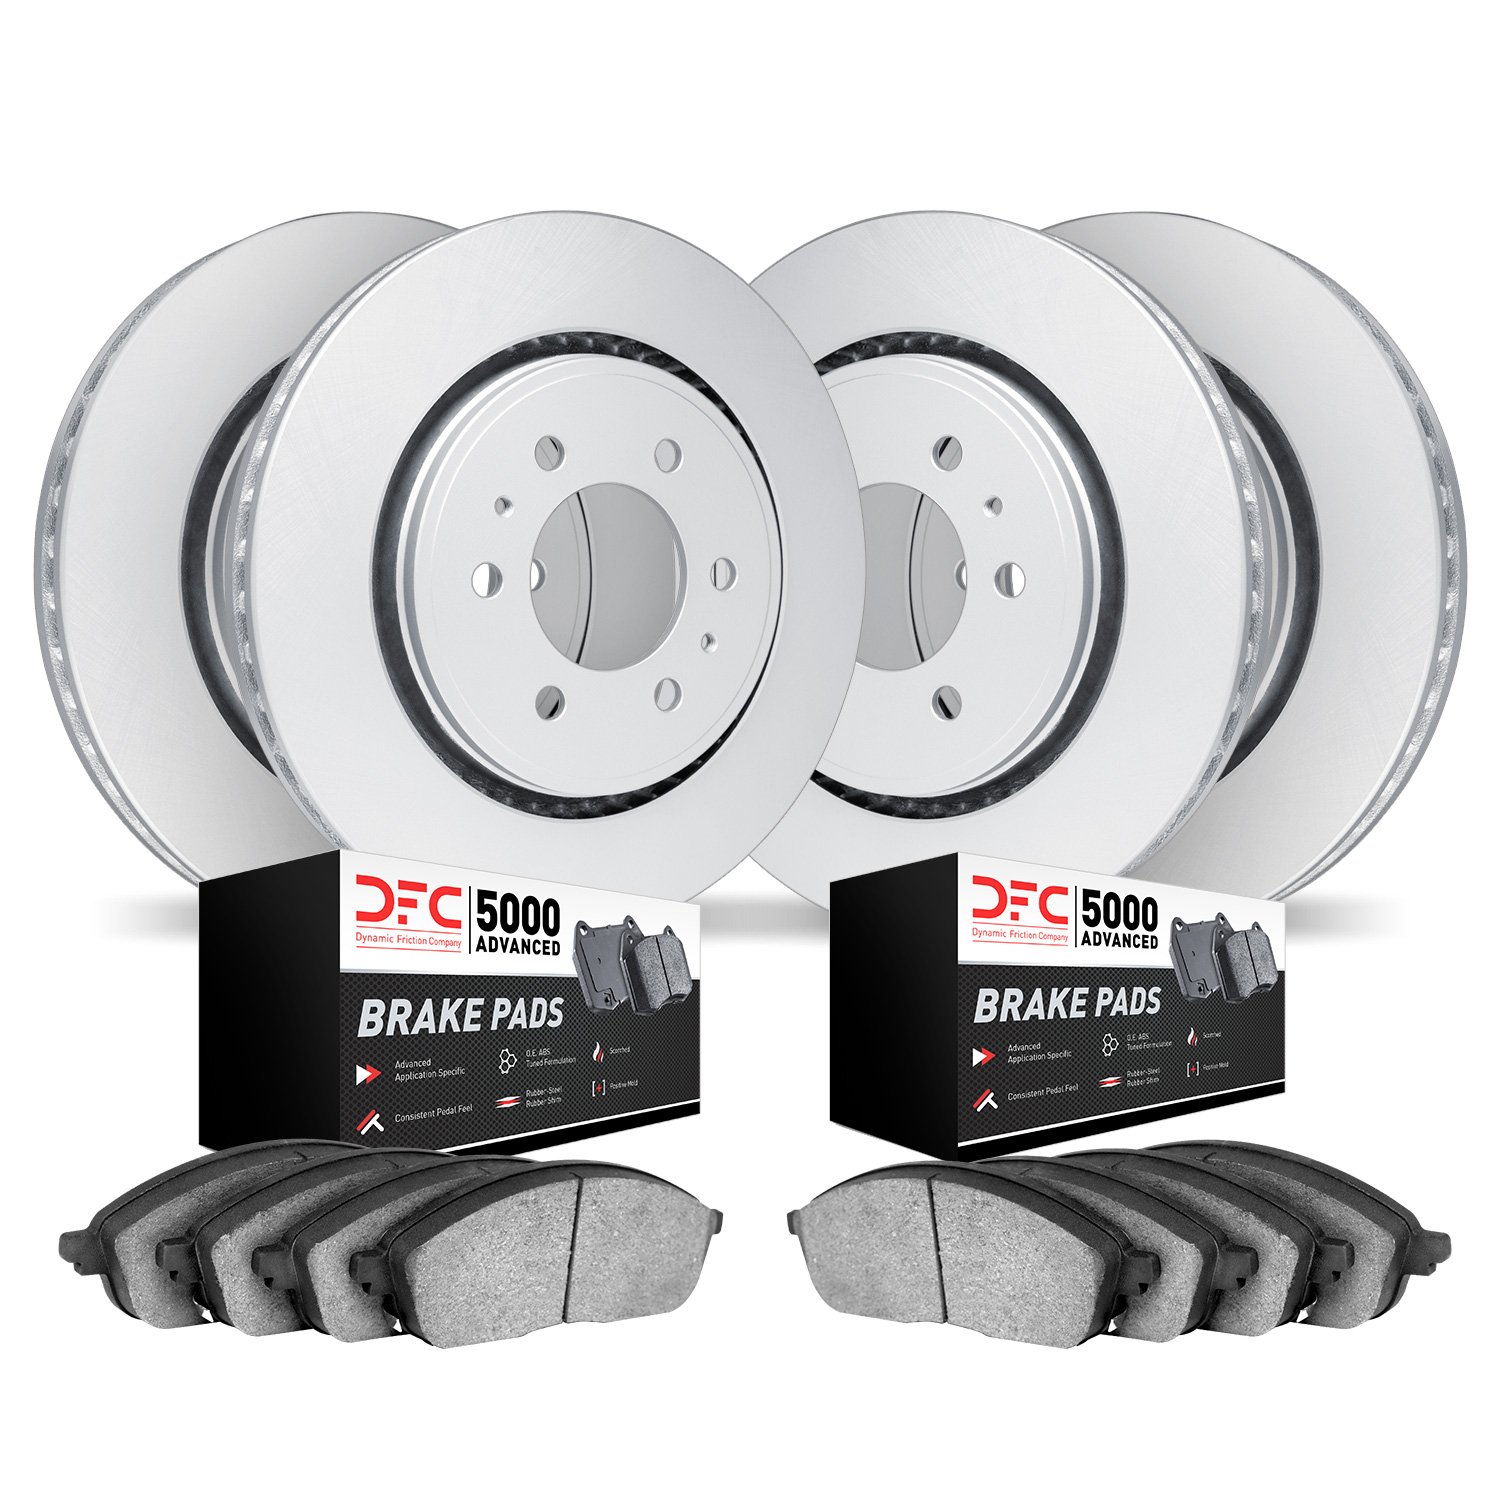 4504-54276 Geospec Brake Rotors w/5000 Advanced Brake Pads Kit, 2018-2020 Ford/Lincoln/Mercury/Mazda, Position: Front and Rear